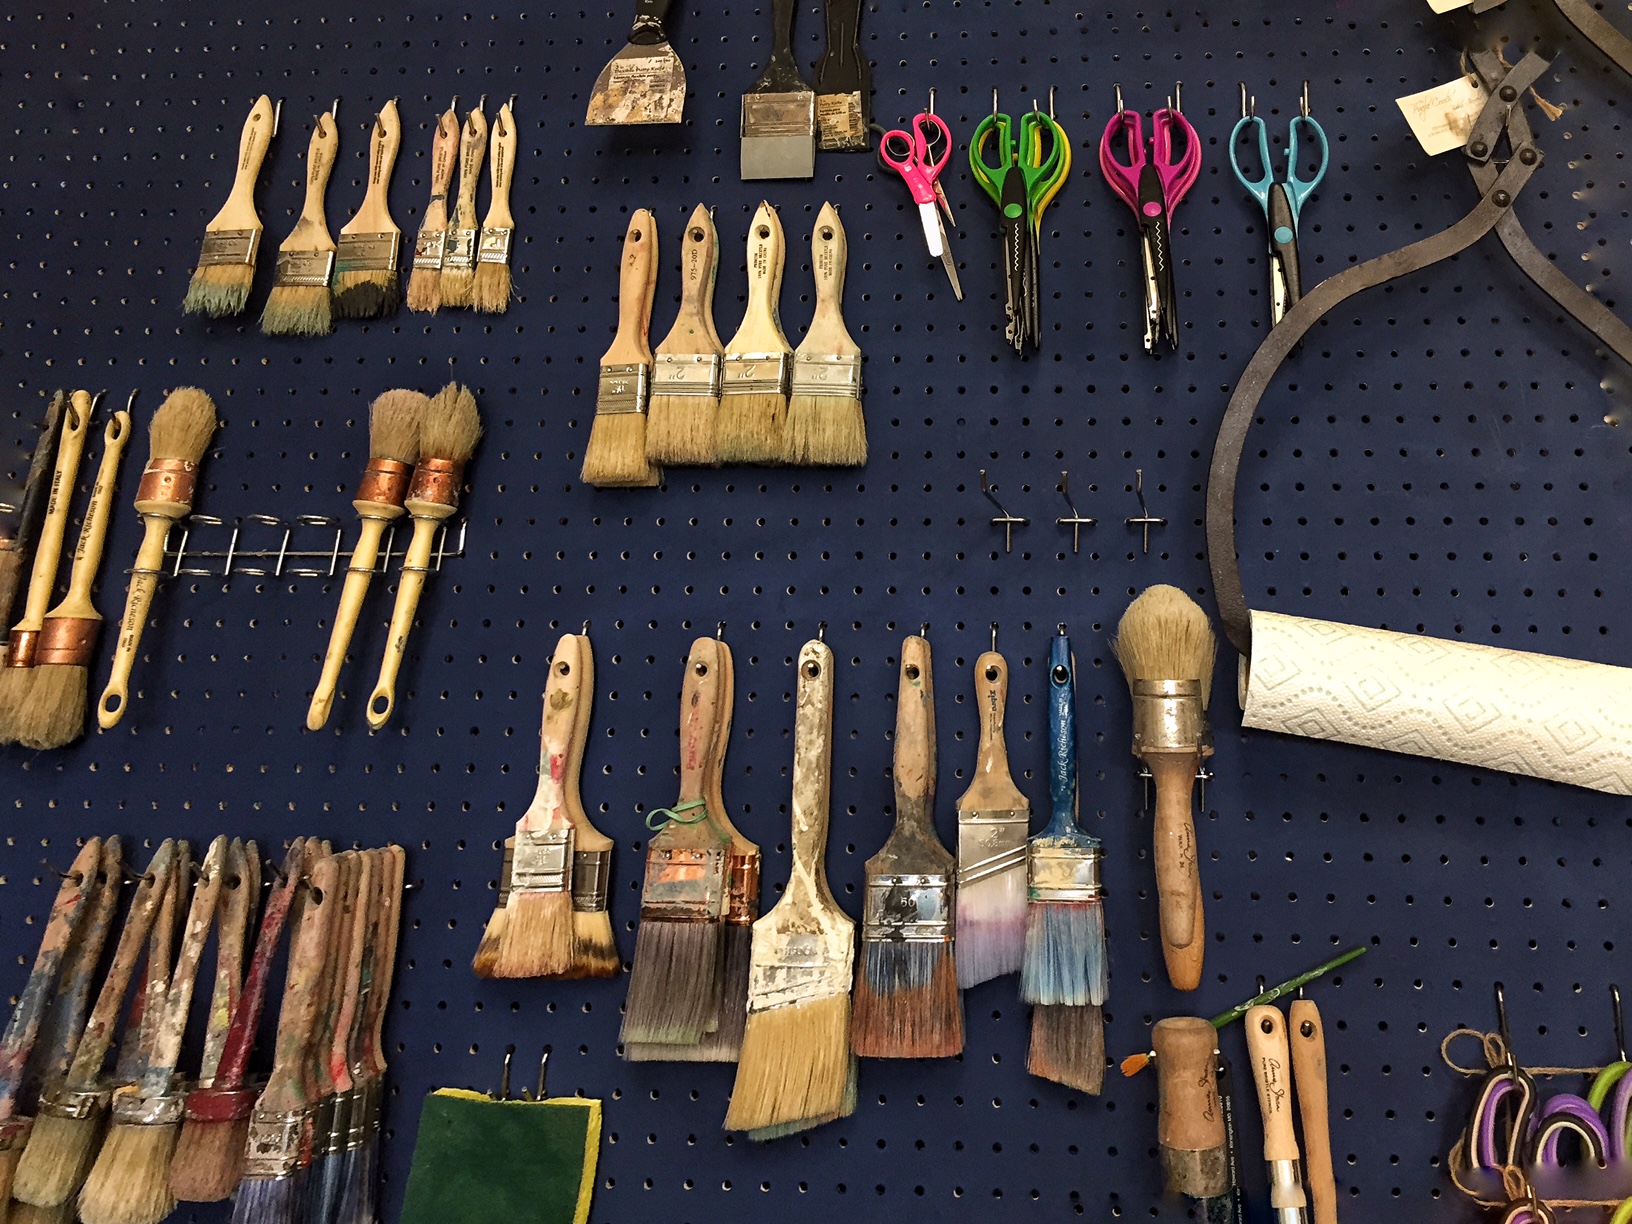 Tools of the trade: an assortment of brushes for the workshops Akerele hosts at her shop. (Kate Ryan/WTOP)